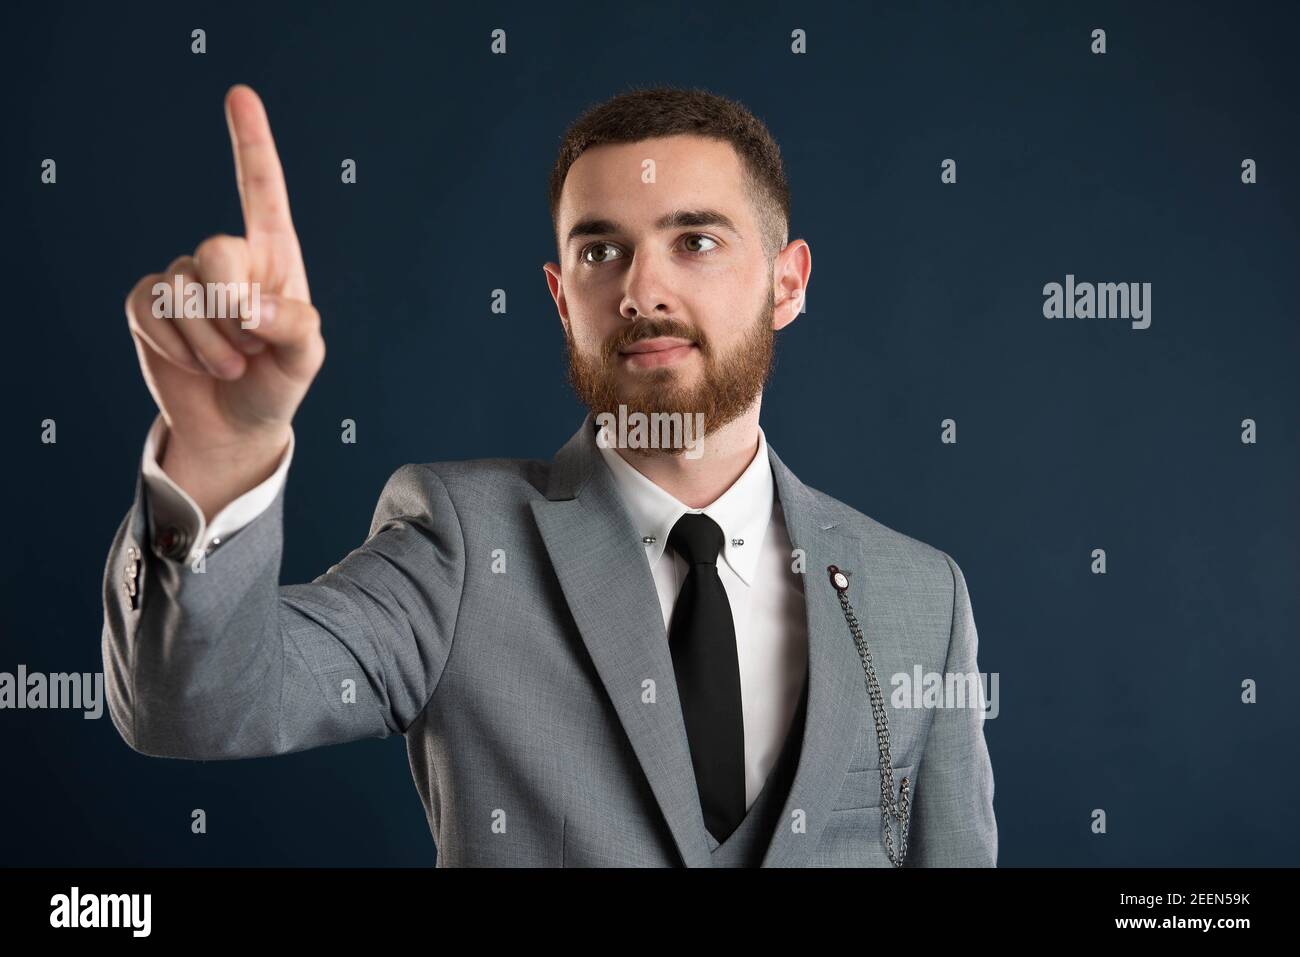 Smiling young businessman pointing at a virtual screen wearing a grey suit and black tie Stock Photo